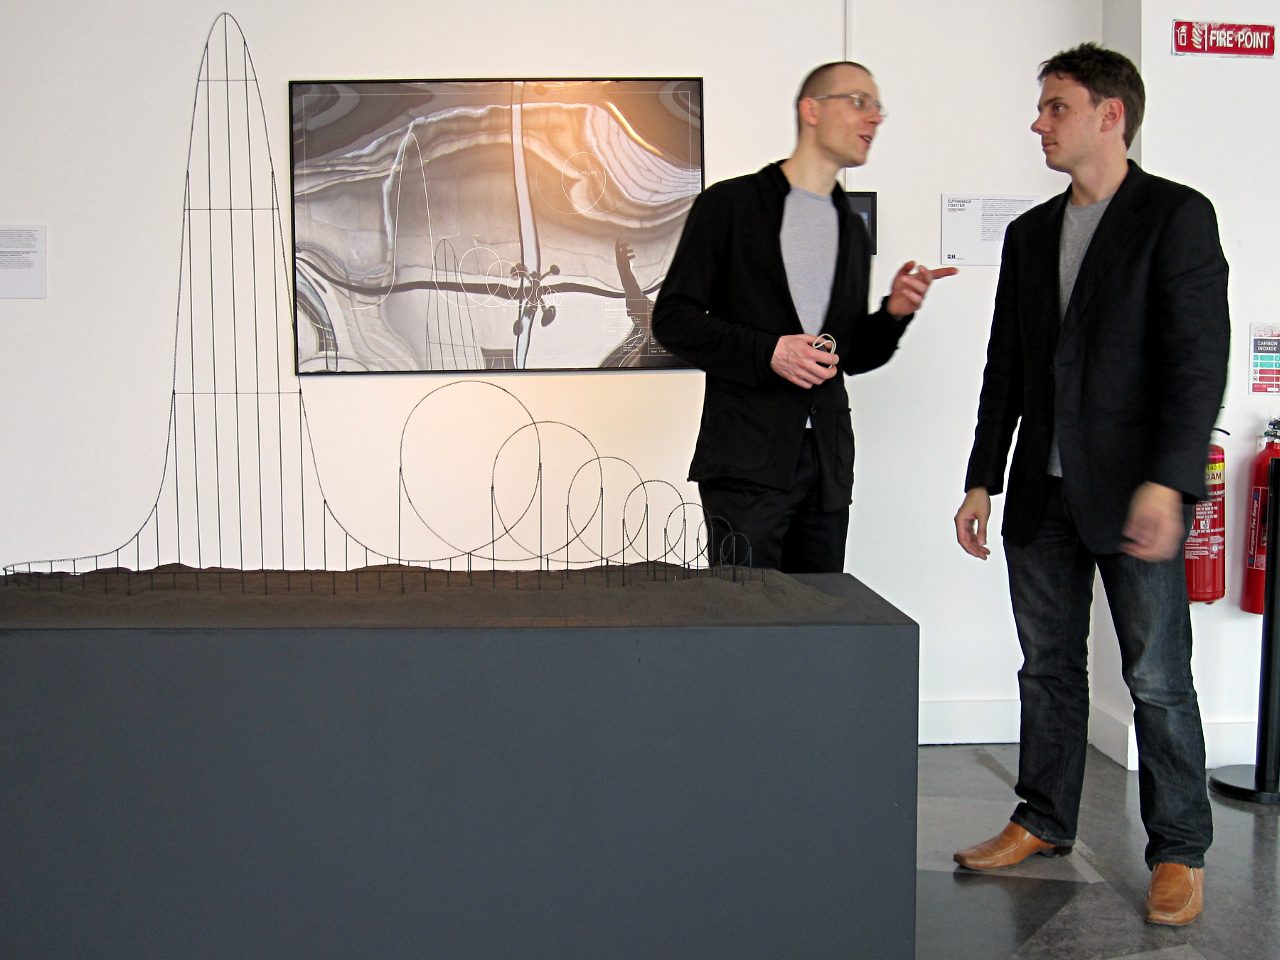 Julijonas Urbonas (left) and the Euthanasia Coaster concept at the HUMAN+ exhibition at the Science Gallery in Dublin.